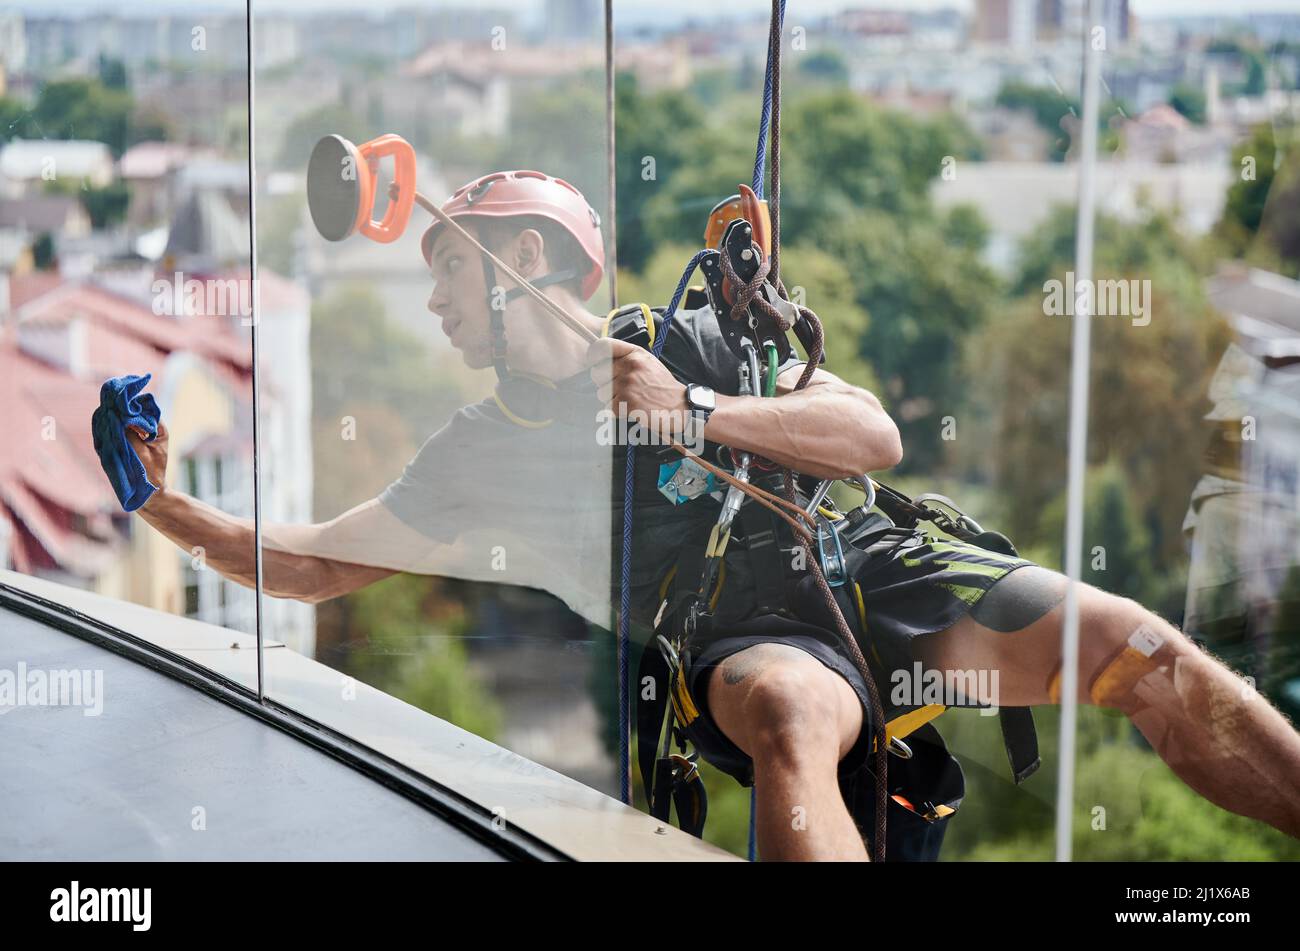 Industrial mountaineering cleaning service worker hanging on rope